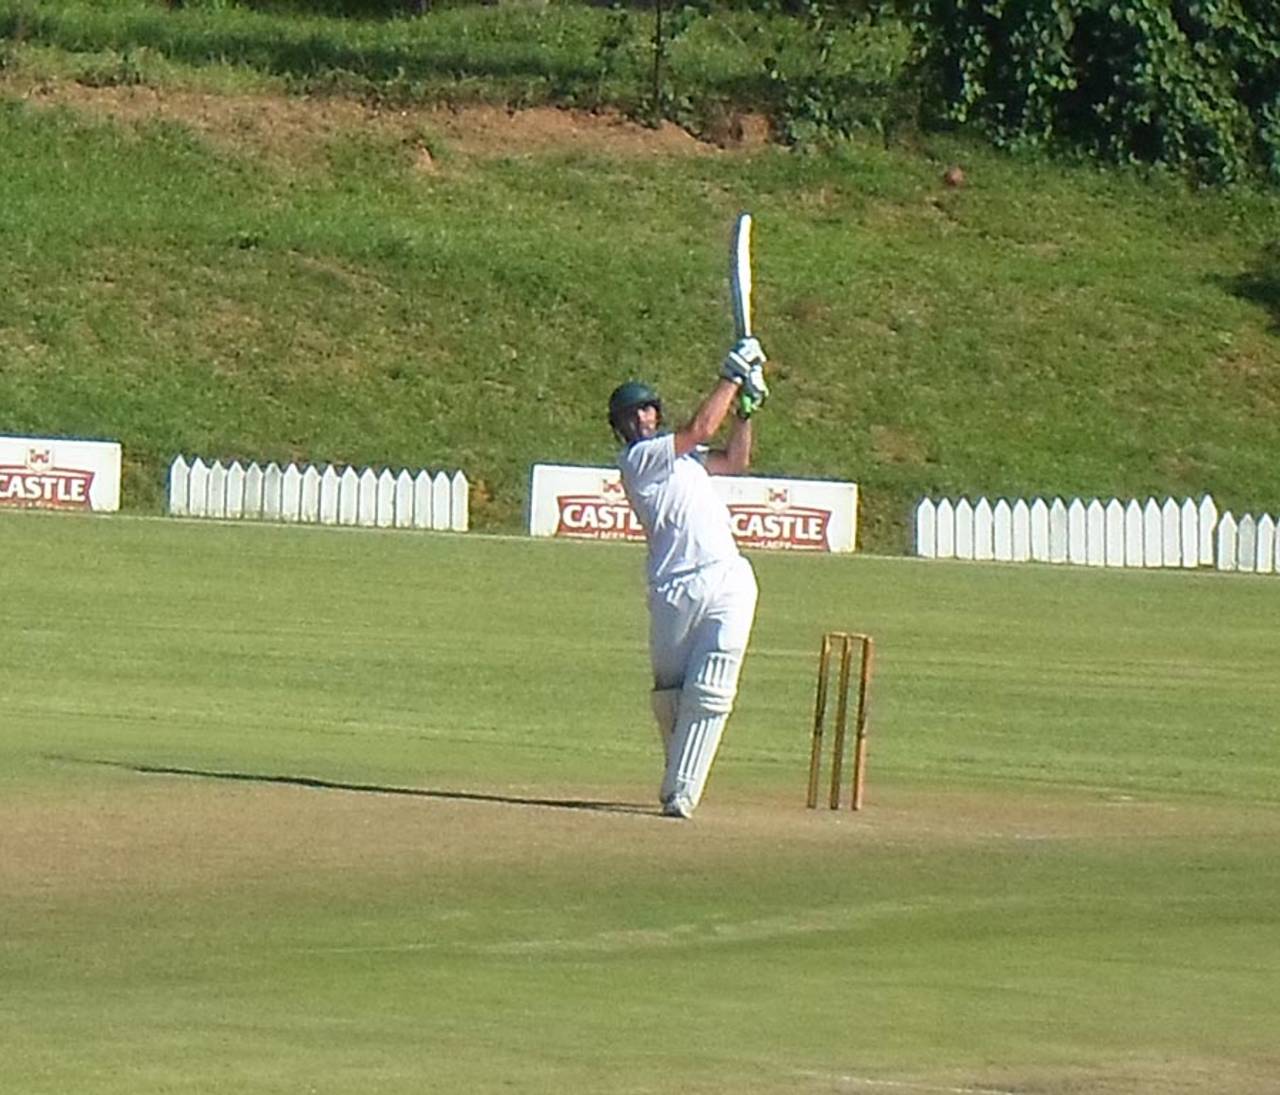 Greg Lamb scored 157 in Mountaineers' first innings, Mountaineers v Matabeleland Tuskers, Logan Cup, 1st day, Mutare, February 19, 2013